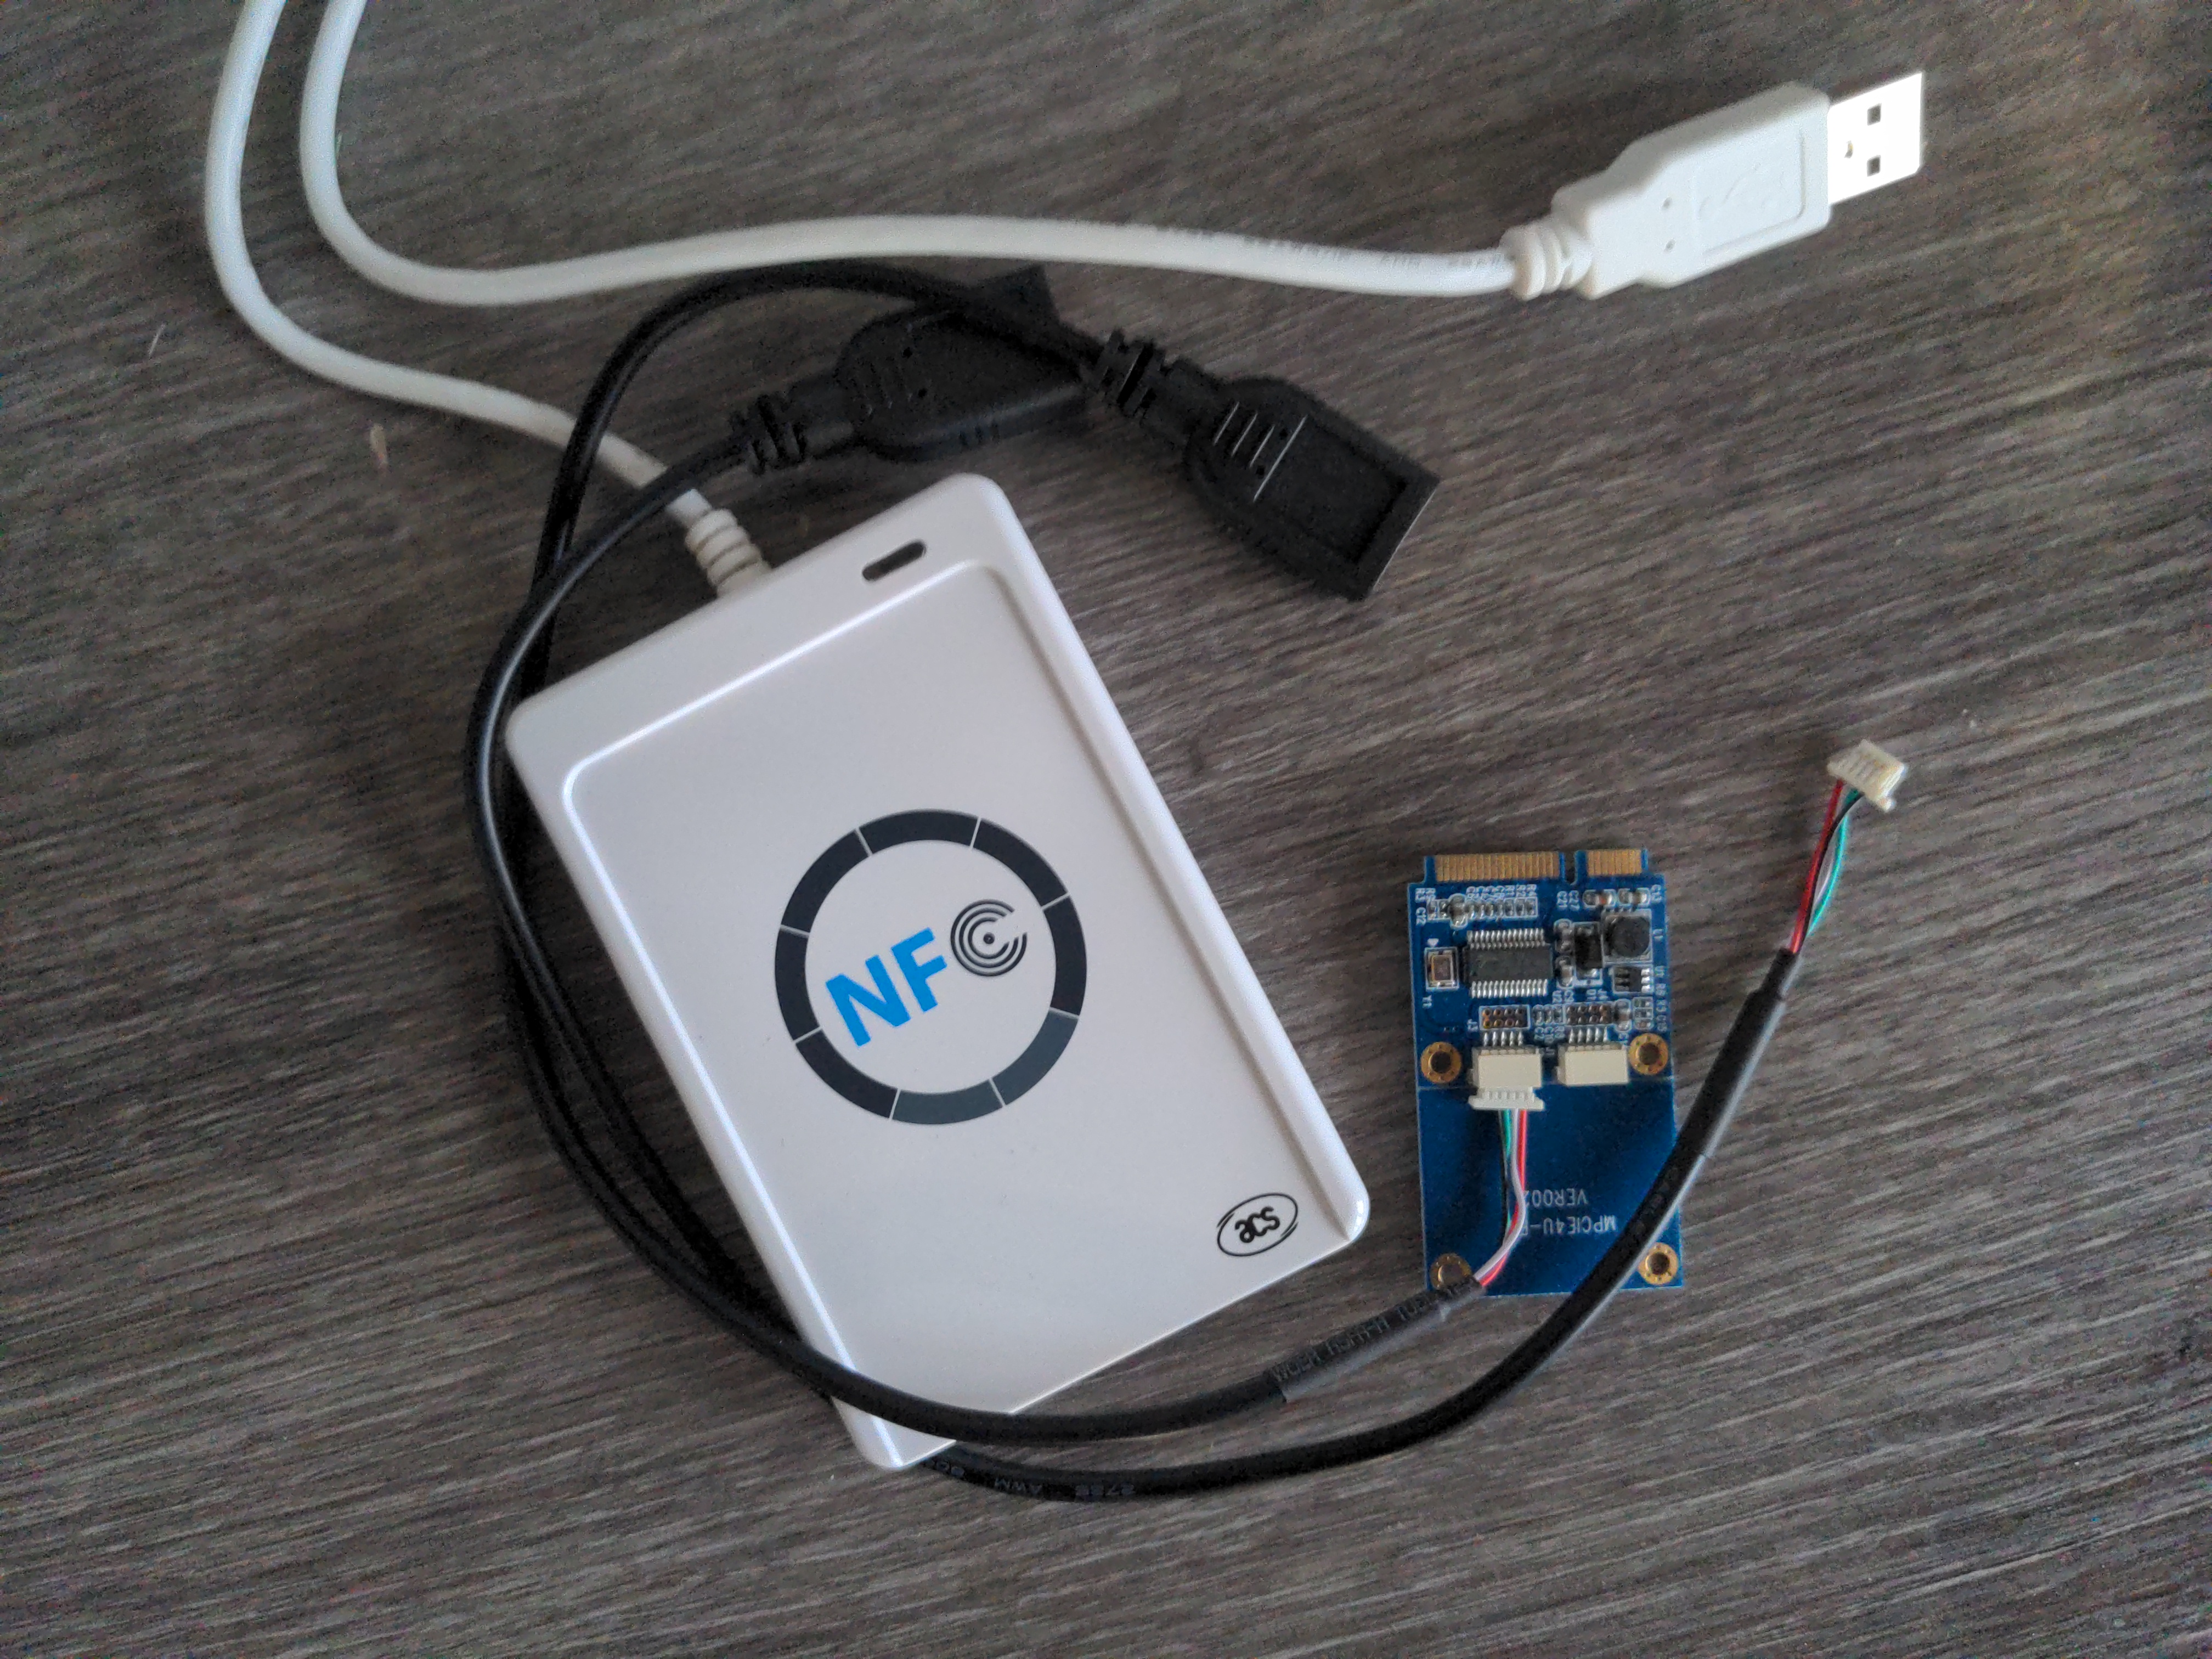 NFC reader and breakout board